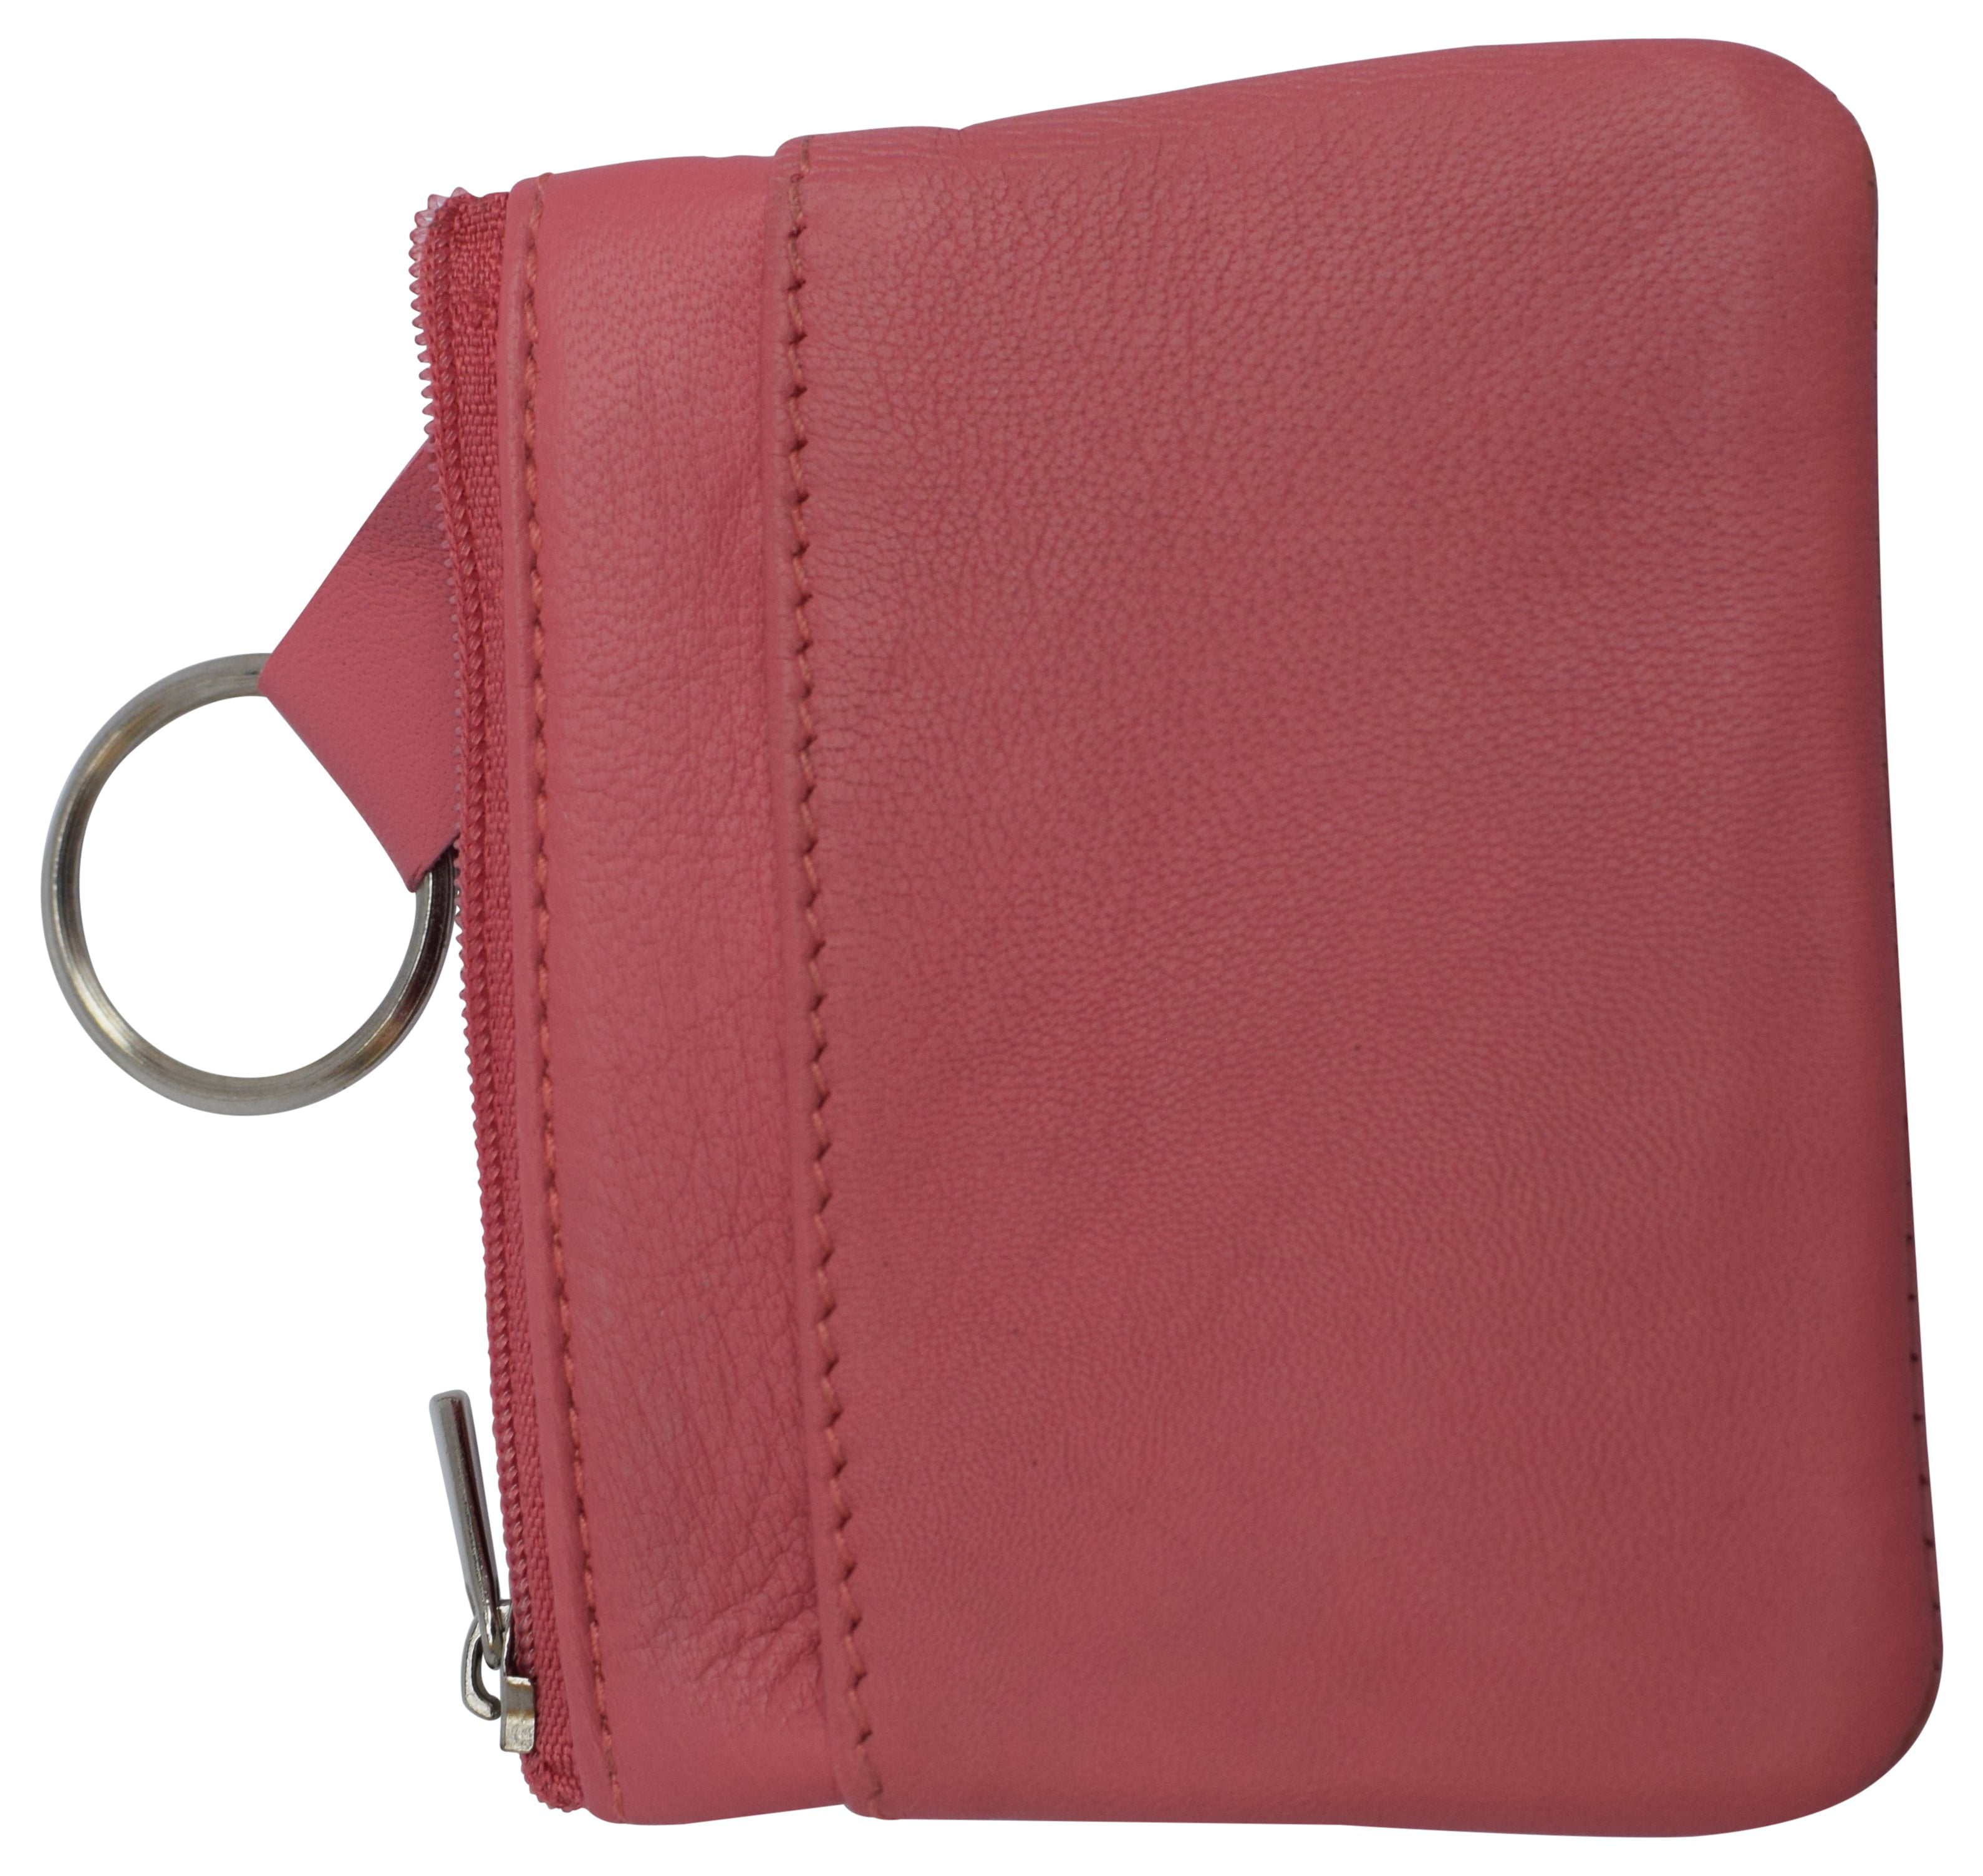 Troika Schlusselloch Leather Coin Wallet Key Chain Combo | Troikaus.com